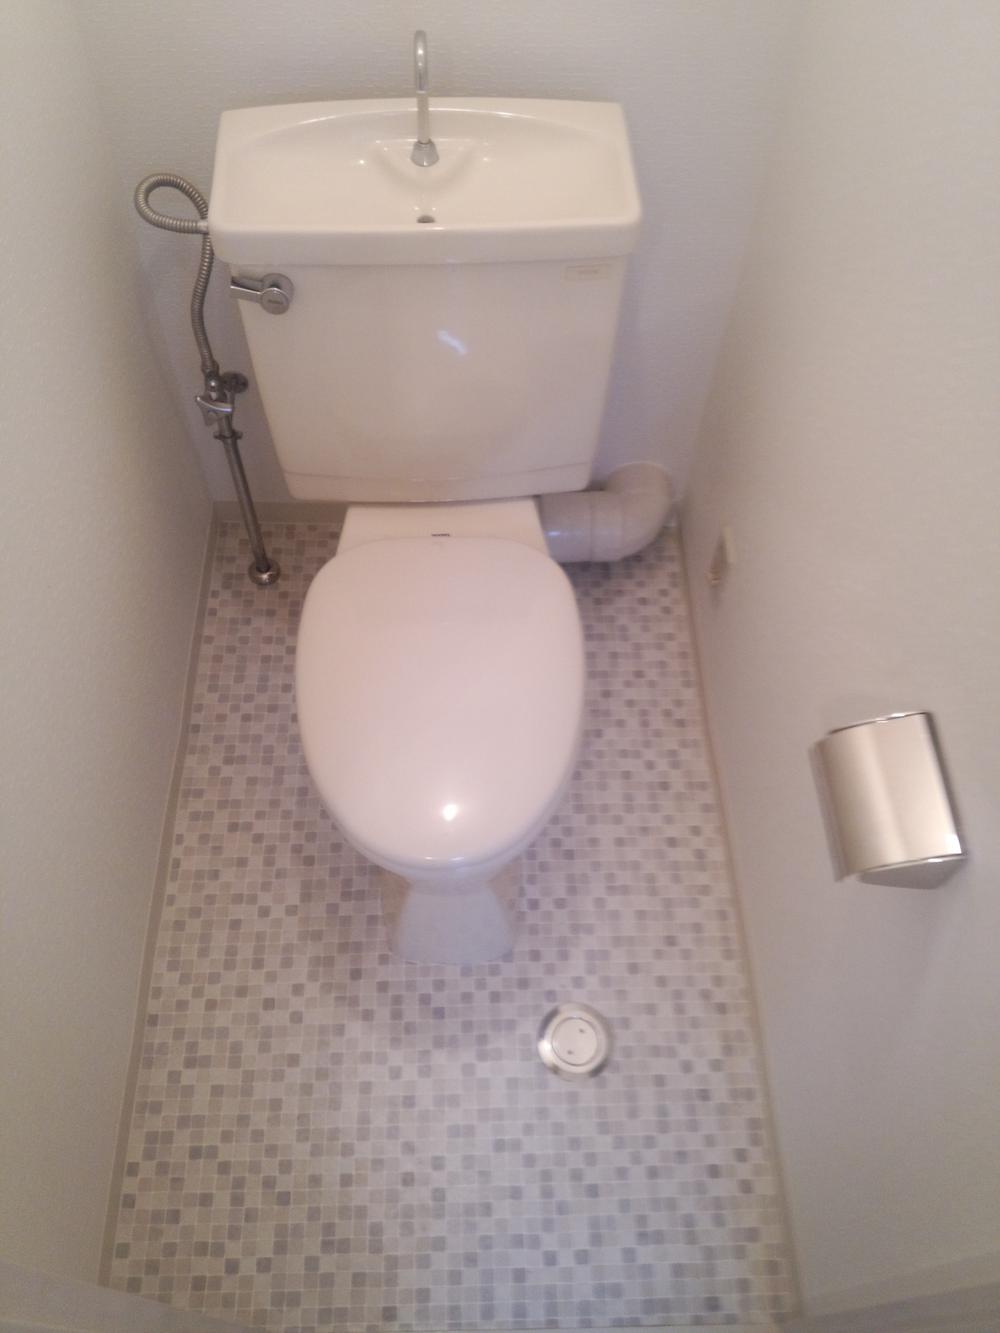 Same specifications photos (Other introspection). It is our example of construction toilet.